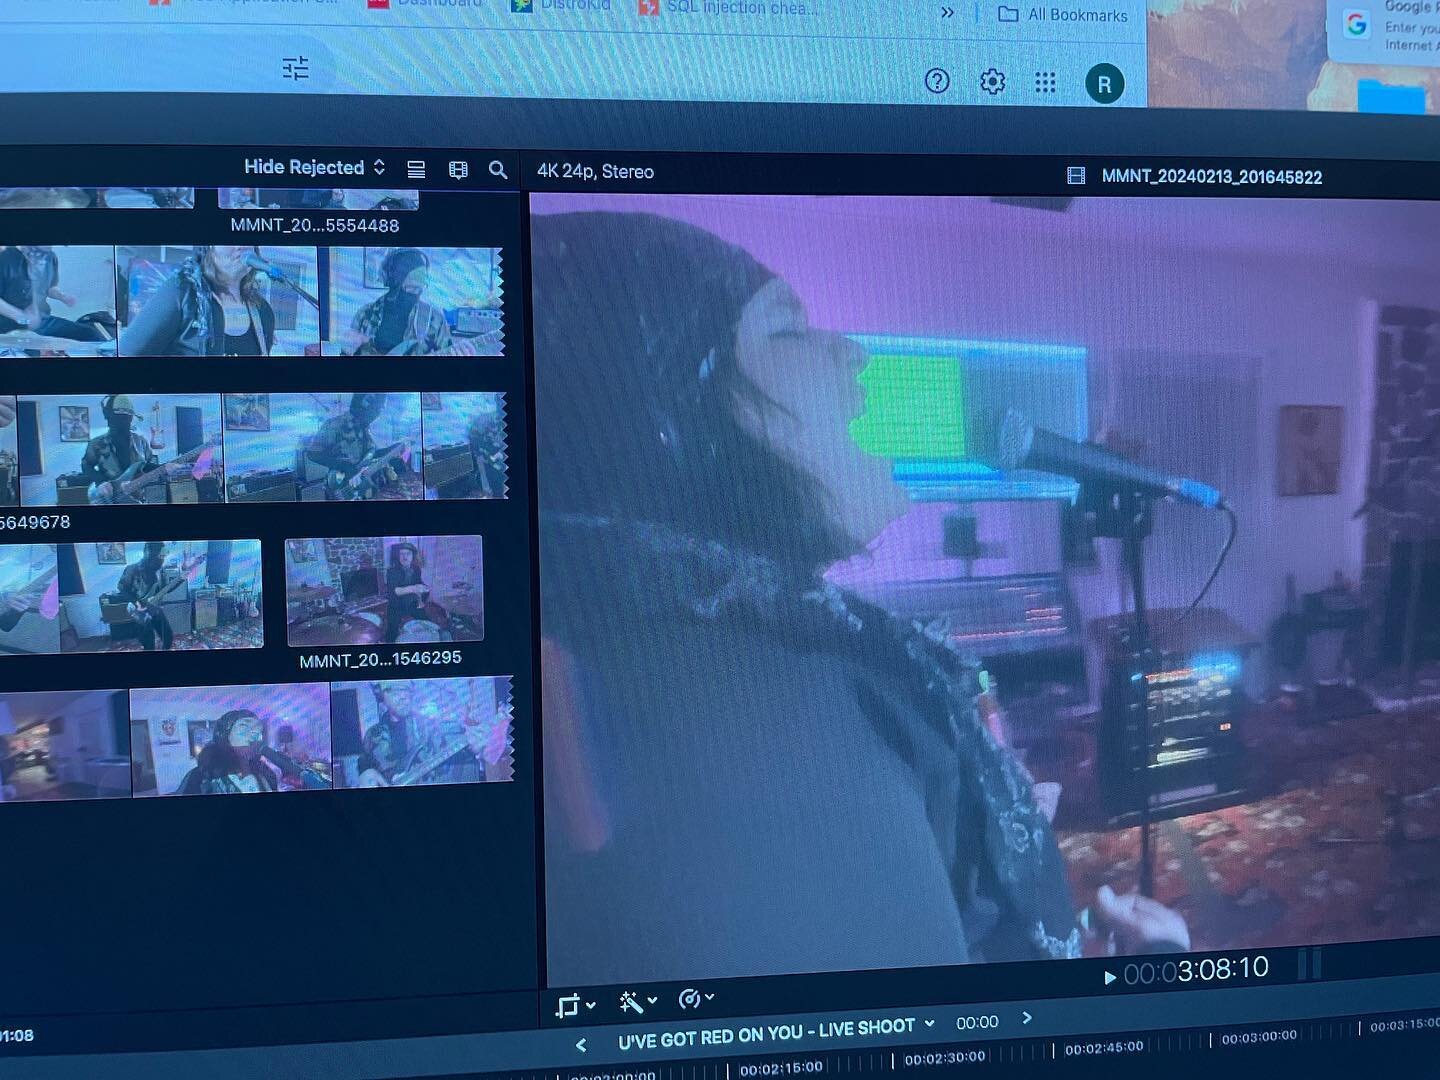 Going over the footage and about to finish up this live recording of &ldquo;U&rsquo;ve Got Red On U&rdquo; perfect in time for a little political music. 

Can&rsquo;t wait to show y&rsquo;all the goods. Thank you @character_talent  for the shot and t